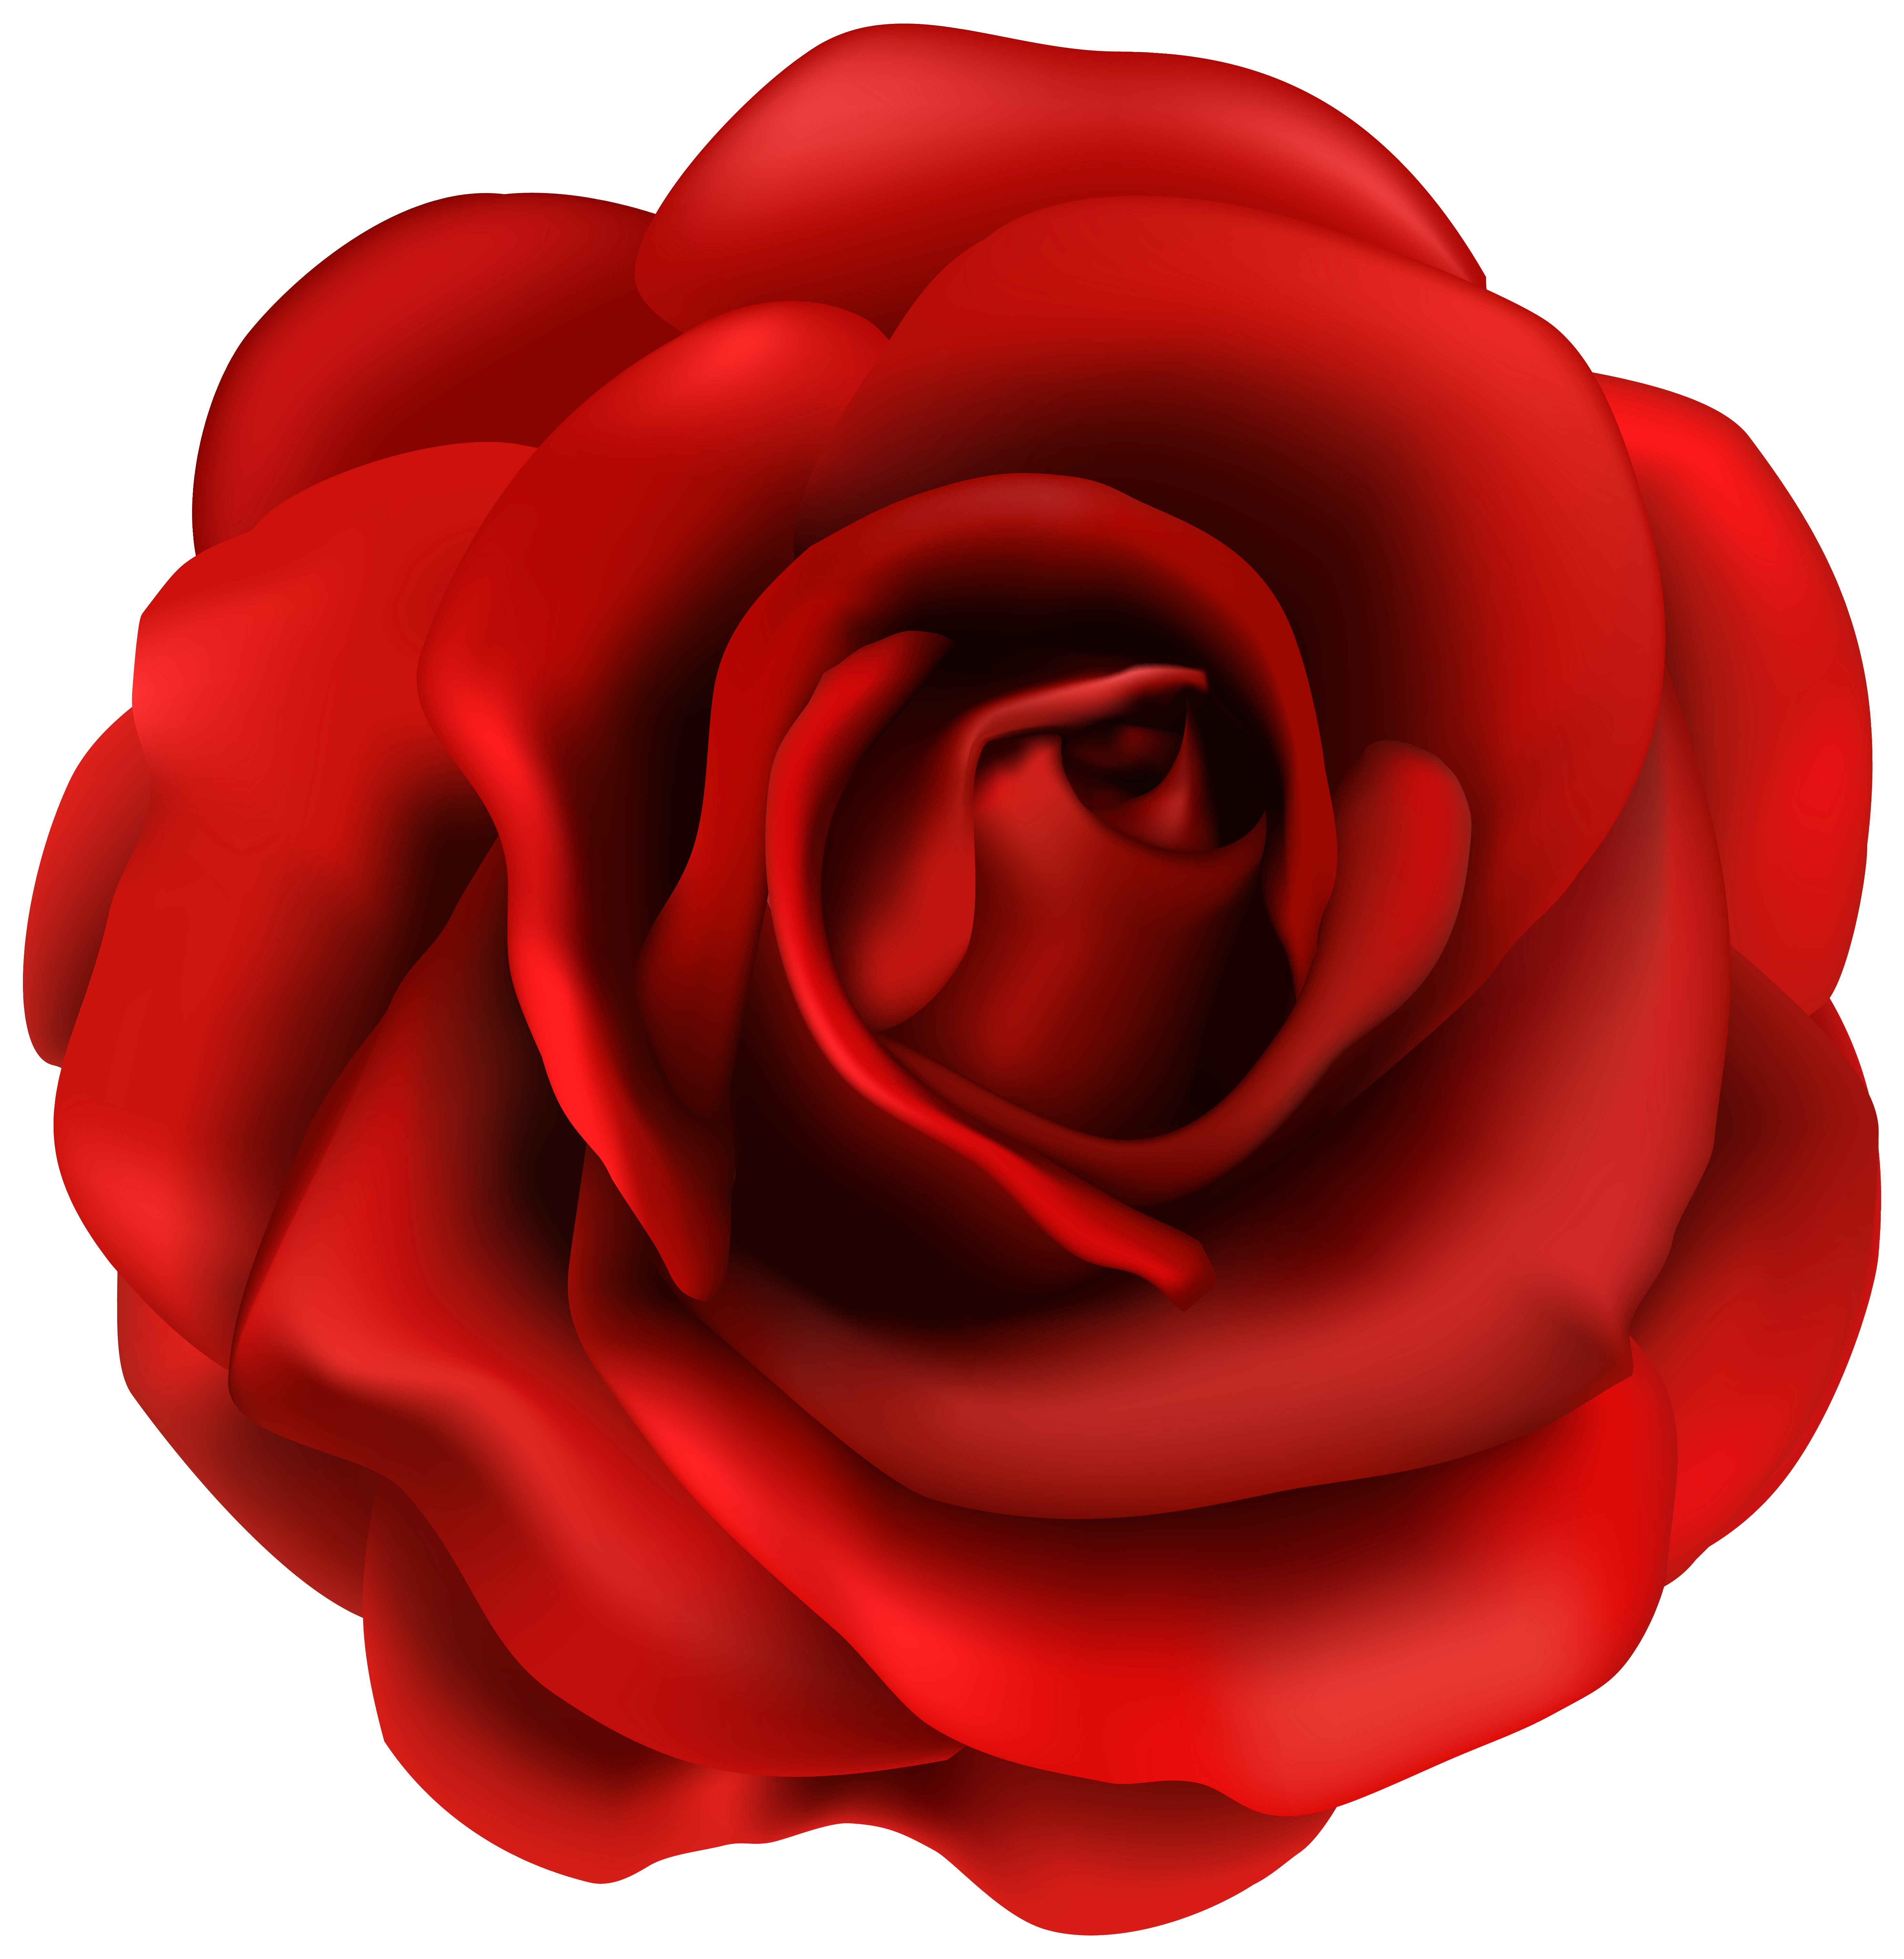 Rose png image gallery. Flower clipart red